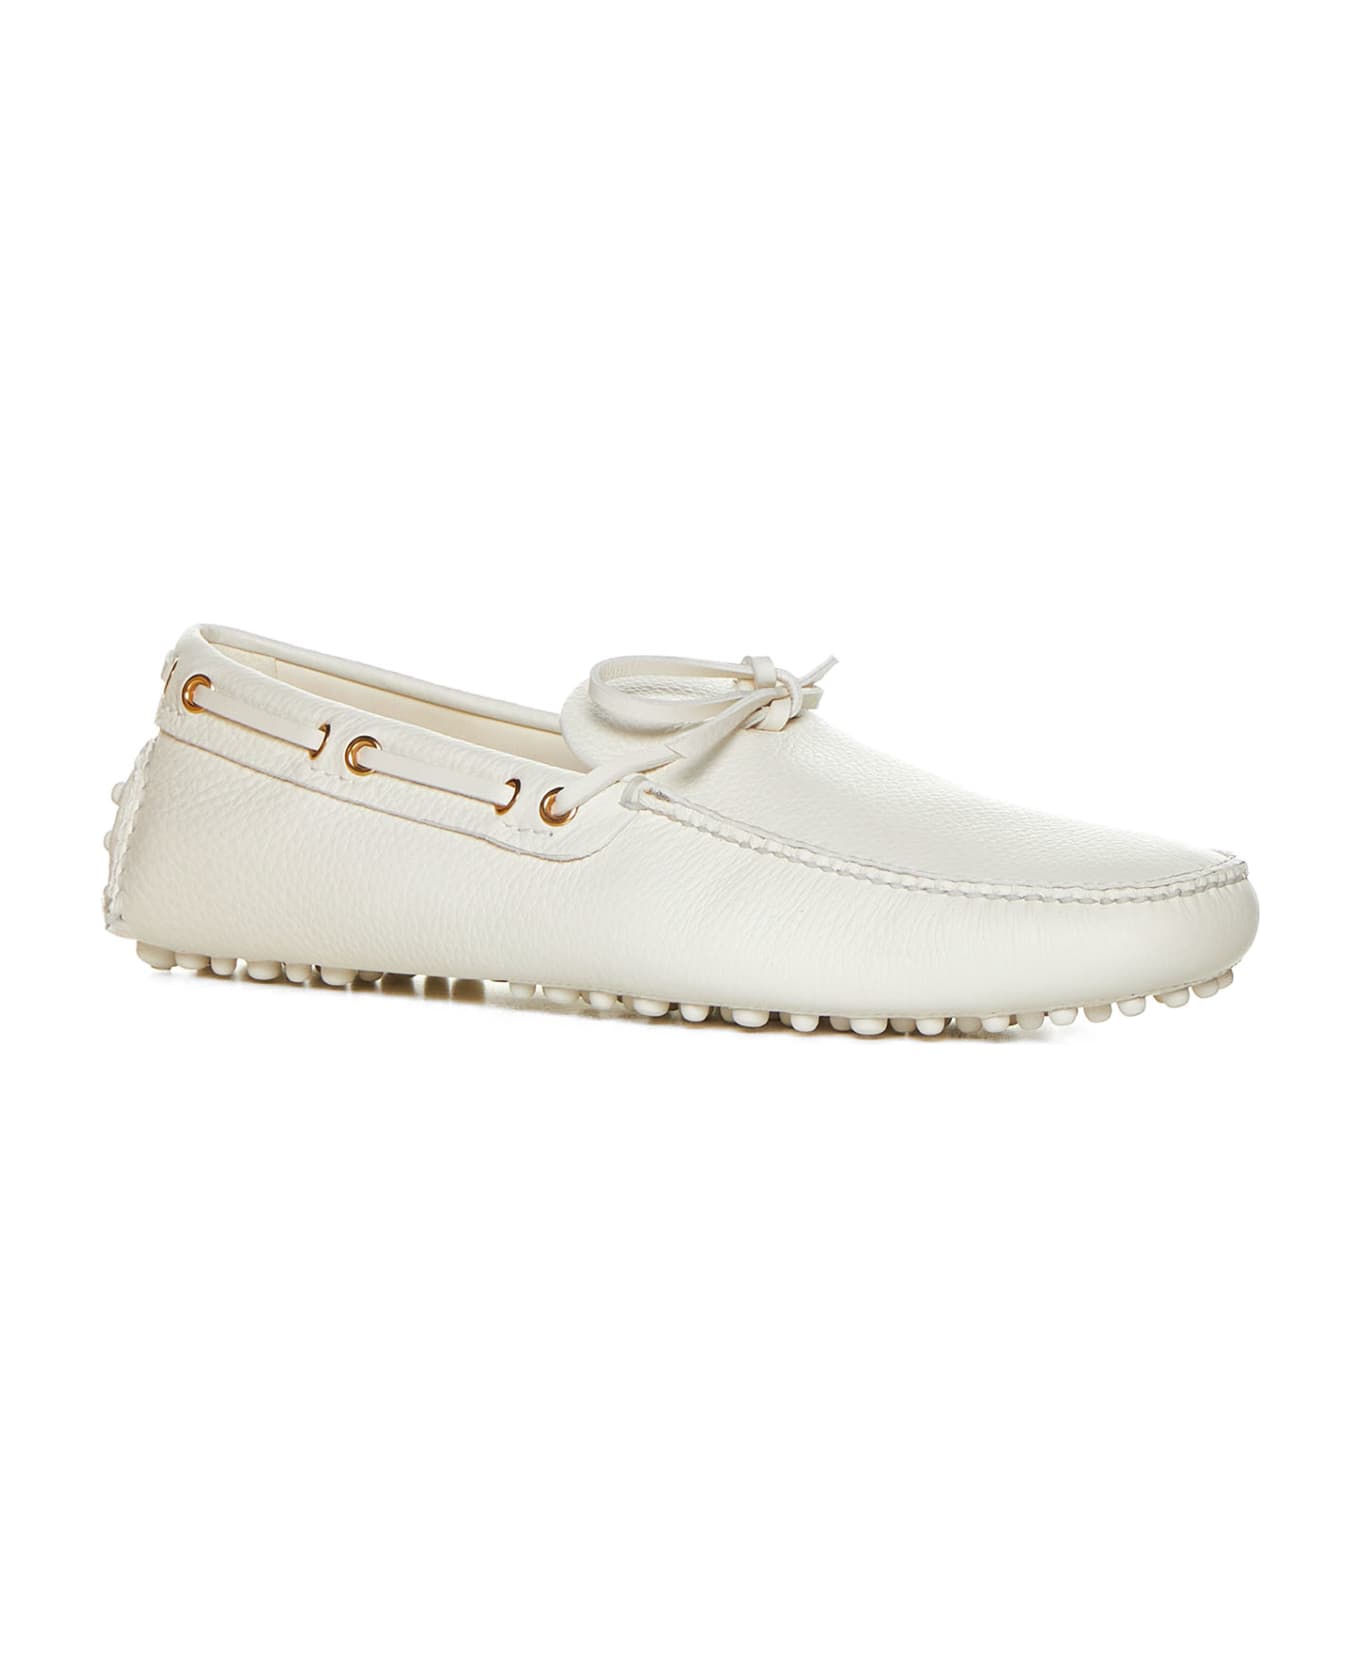 Car Shoe Loafers - Ivory